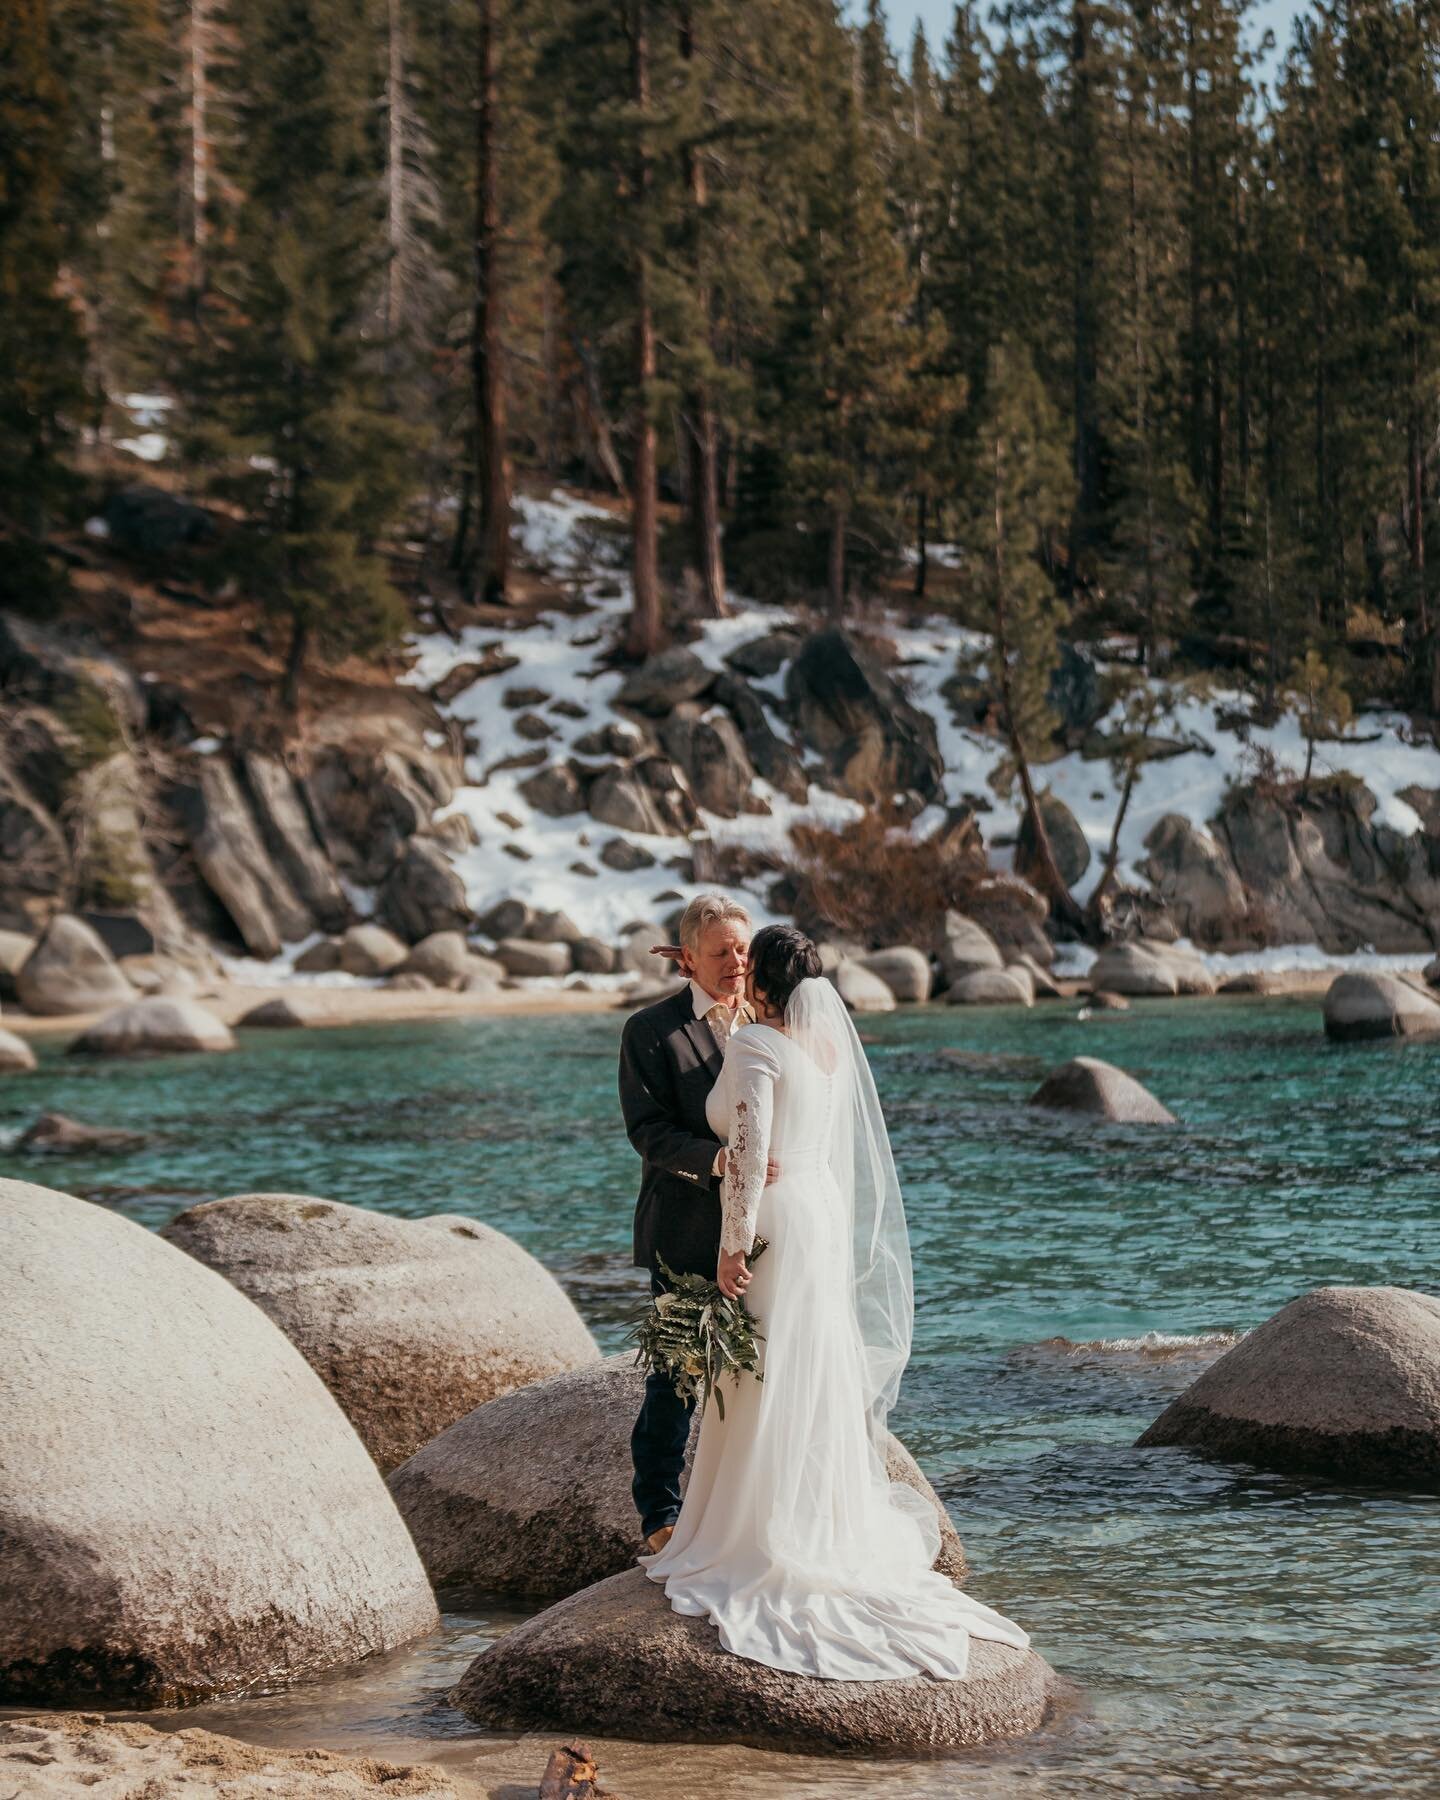 Today was Charlie and Lora&rsquo;s big day!  We hiked, laughed and got some epic photos in some epic spots. 

Congrats you two!!! So glad I was able to capture this for you.  Can&rsquo;t wait to show you more!  Cheers to you two!
.
.
#tahoeelopement 